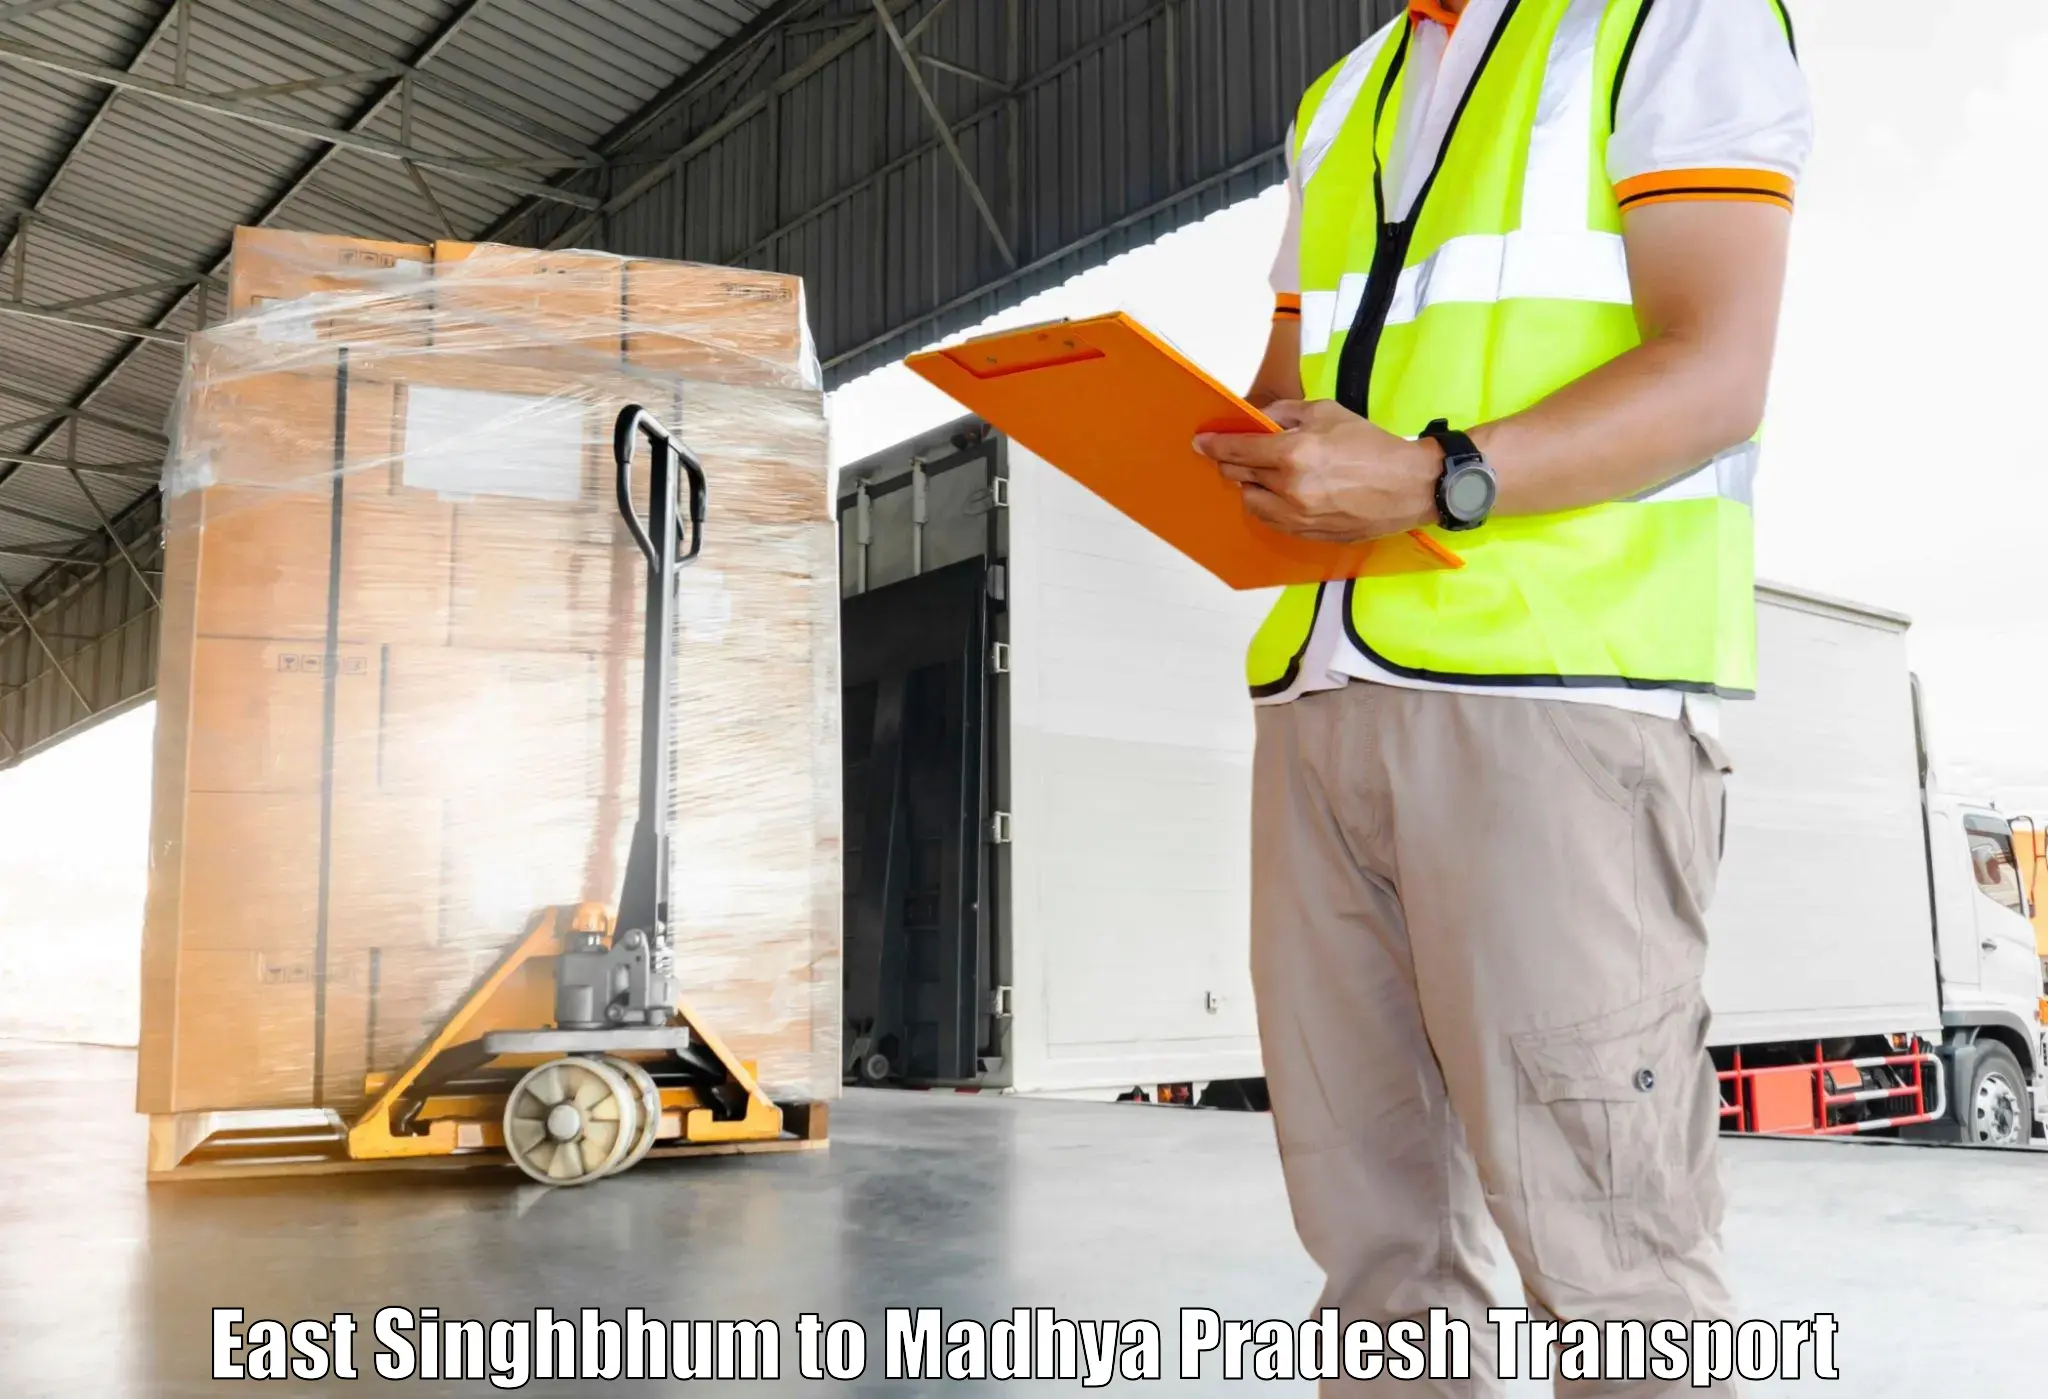 India truck logistics services in East Singhbhum to Petlawad